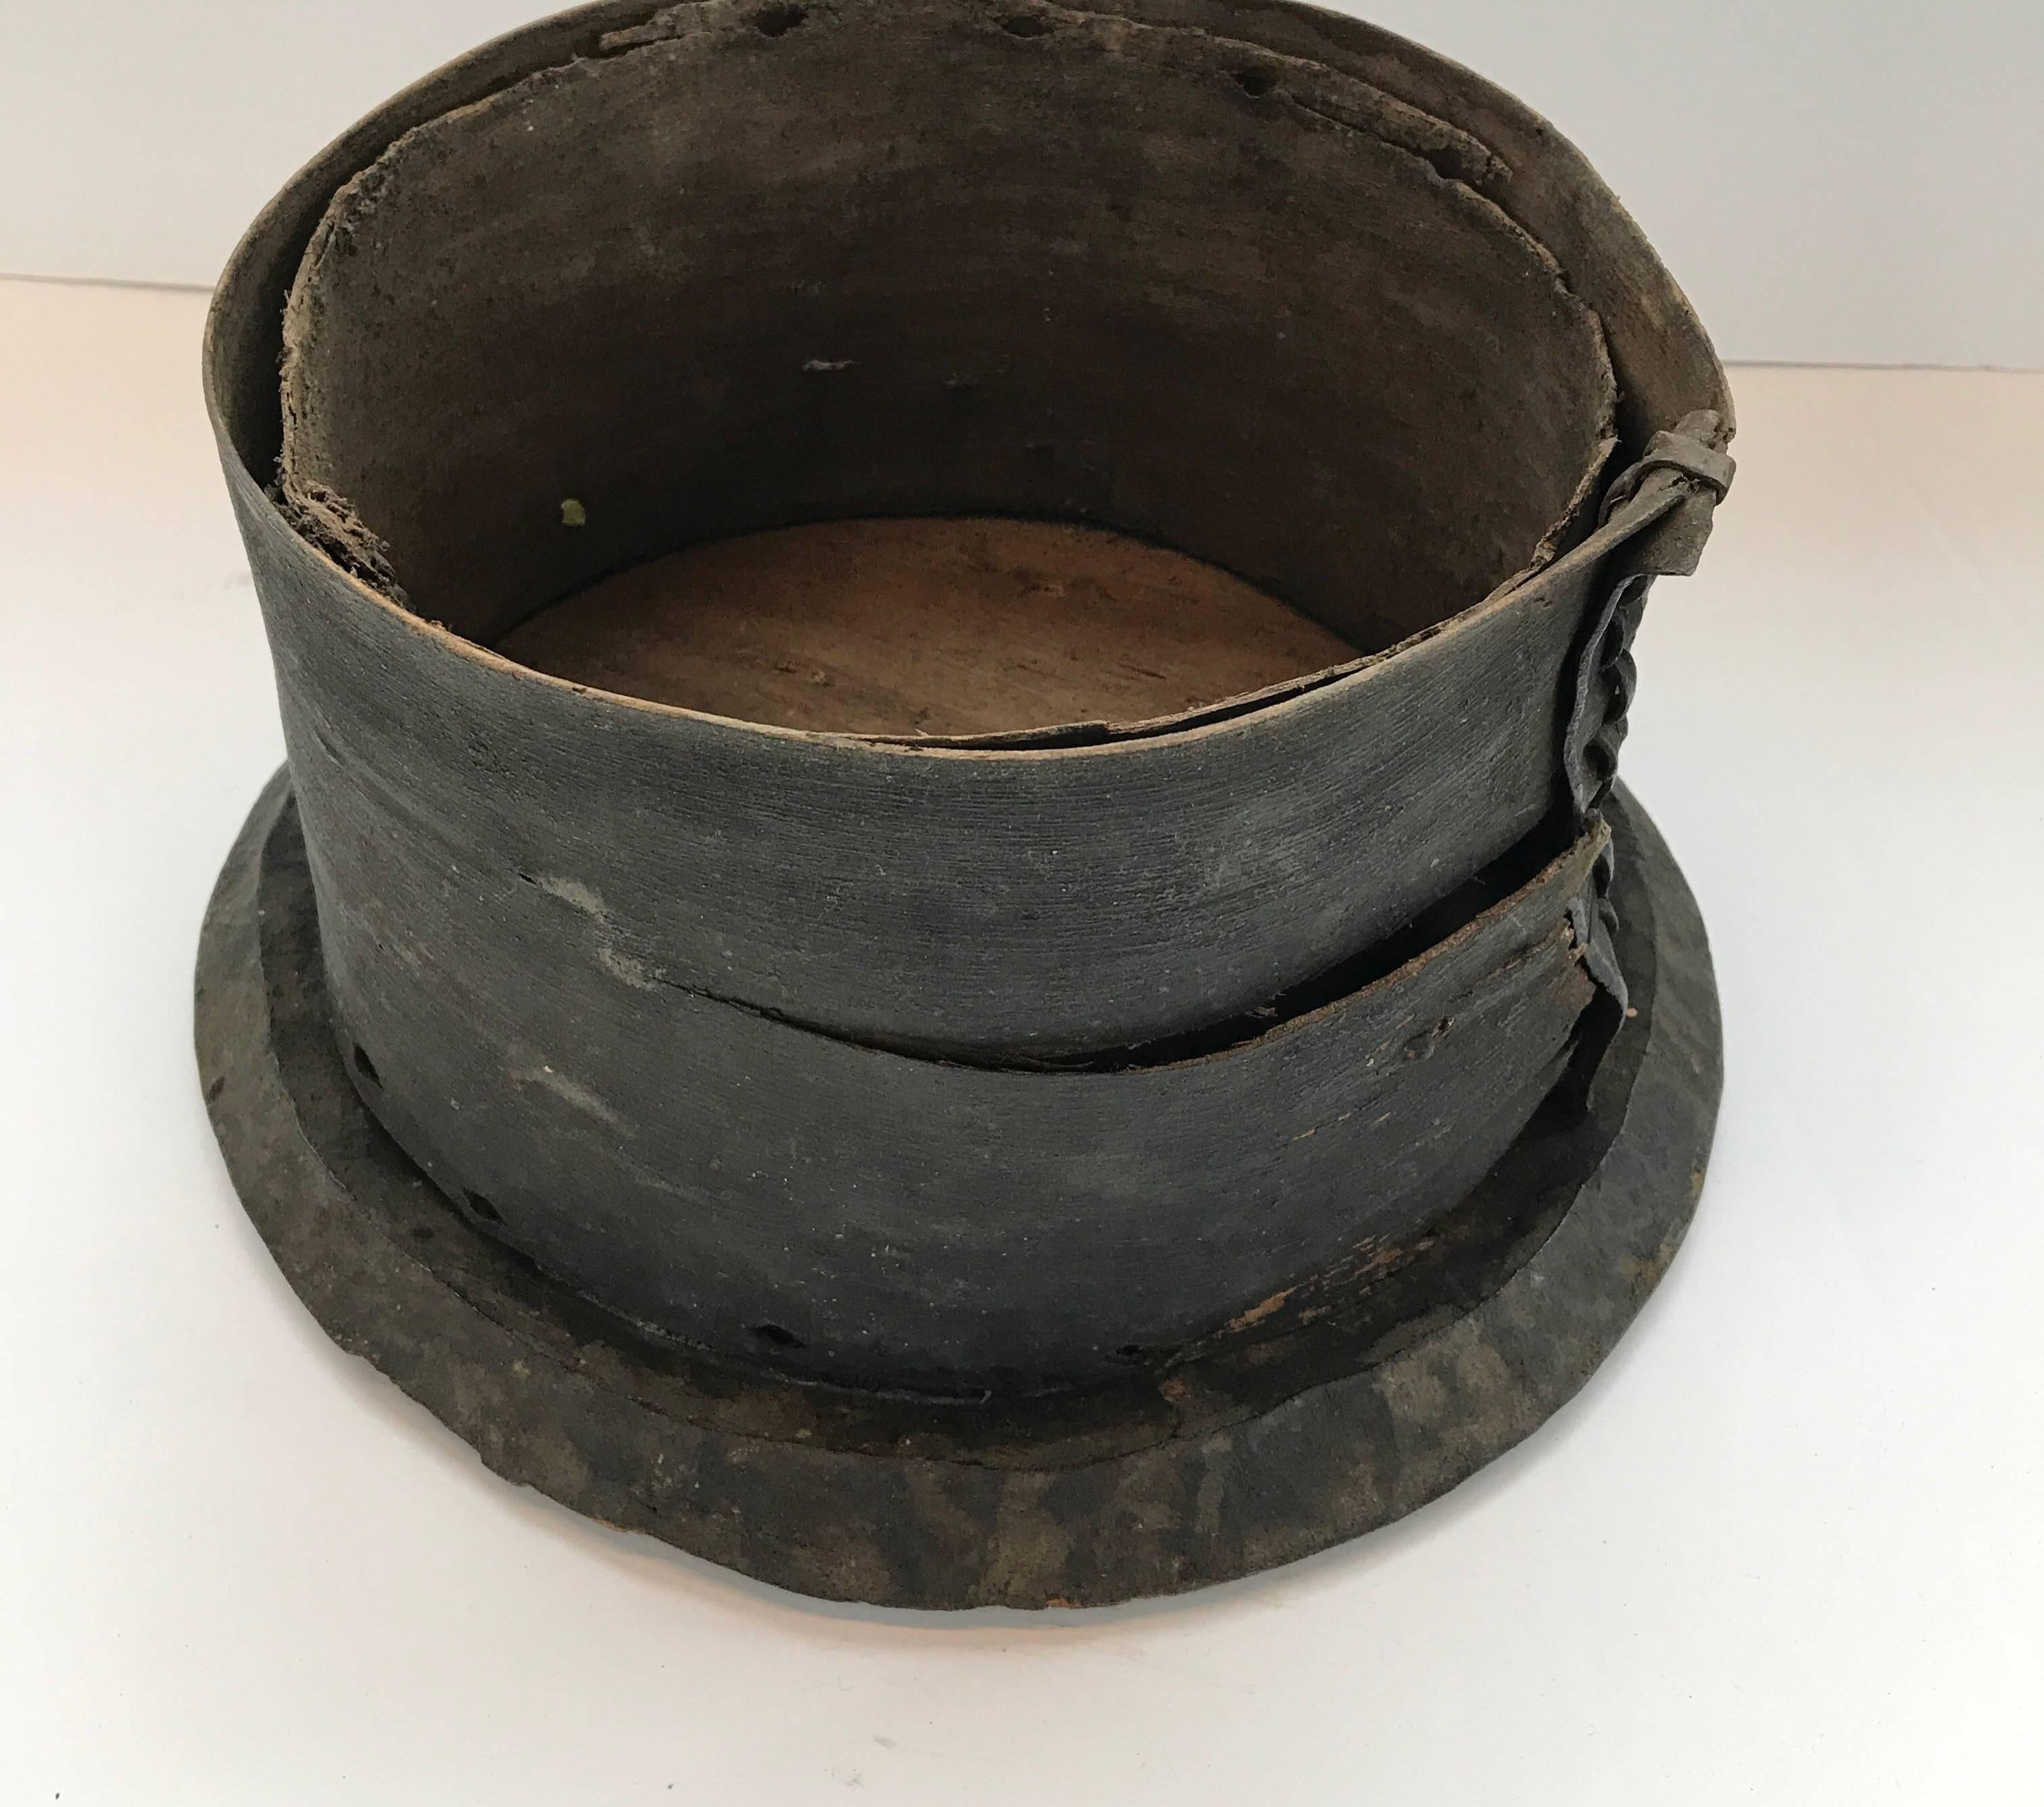 Early 20th century African lidded food storage box
Engraved with Primitive designs



Dimensions:
Box: 8 in. H with a 10-10.25 in. diameter on the top and a 12-13 in. diameter on the bottom. The lid has a 11.5-13 in. diameter.